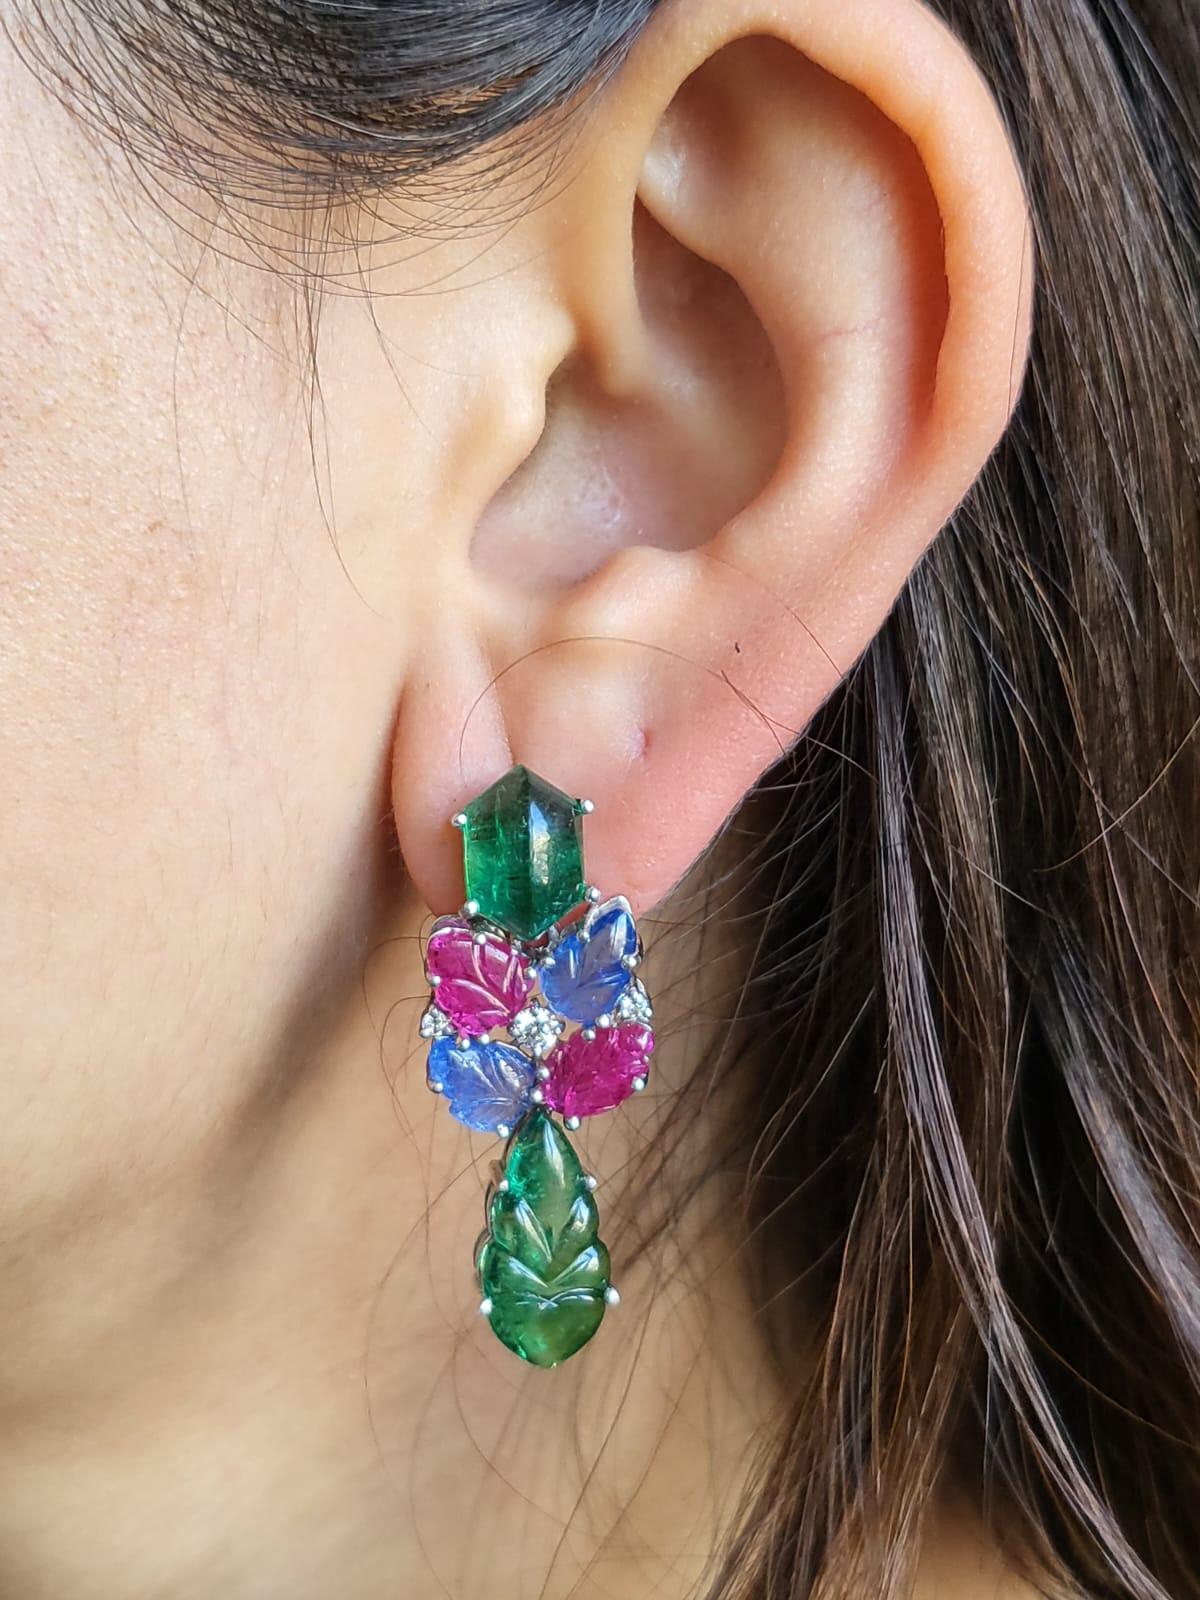 A very classic and beautiful, Blue Sapphire, Emerald & Ruby Tutti Frutti Dangle Earrings set in 18K White Gold & Diamonds. The weight of the Emeralds is 4.78 carats + 6.53 carats(Top & Bottom pair). The Emeralds are of superior quality and are